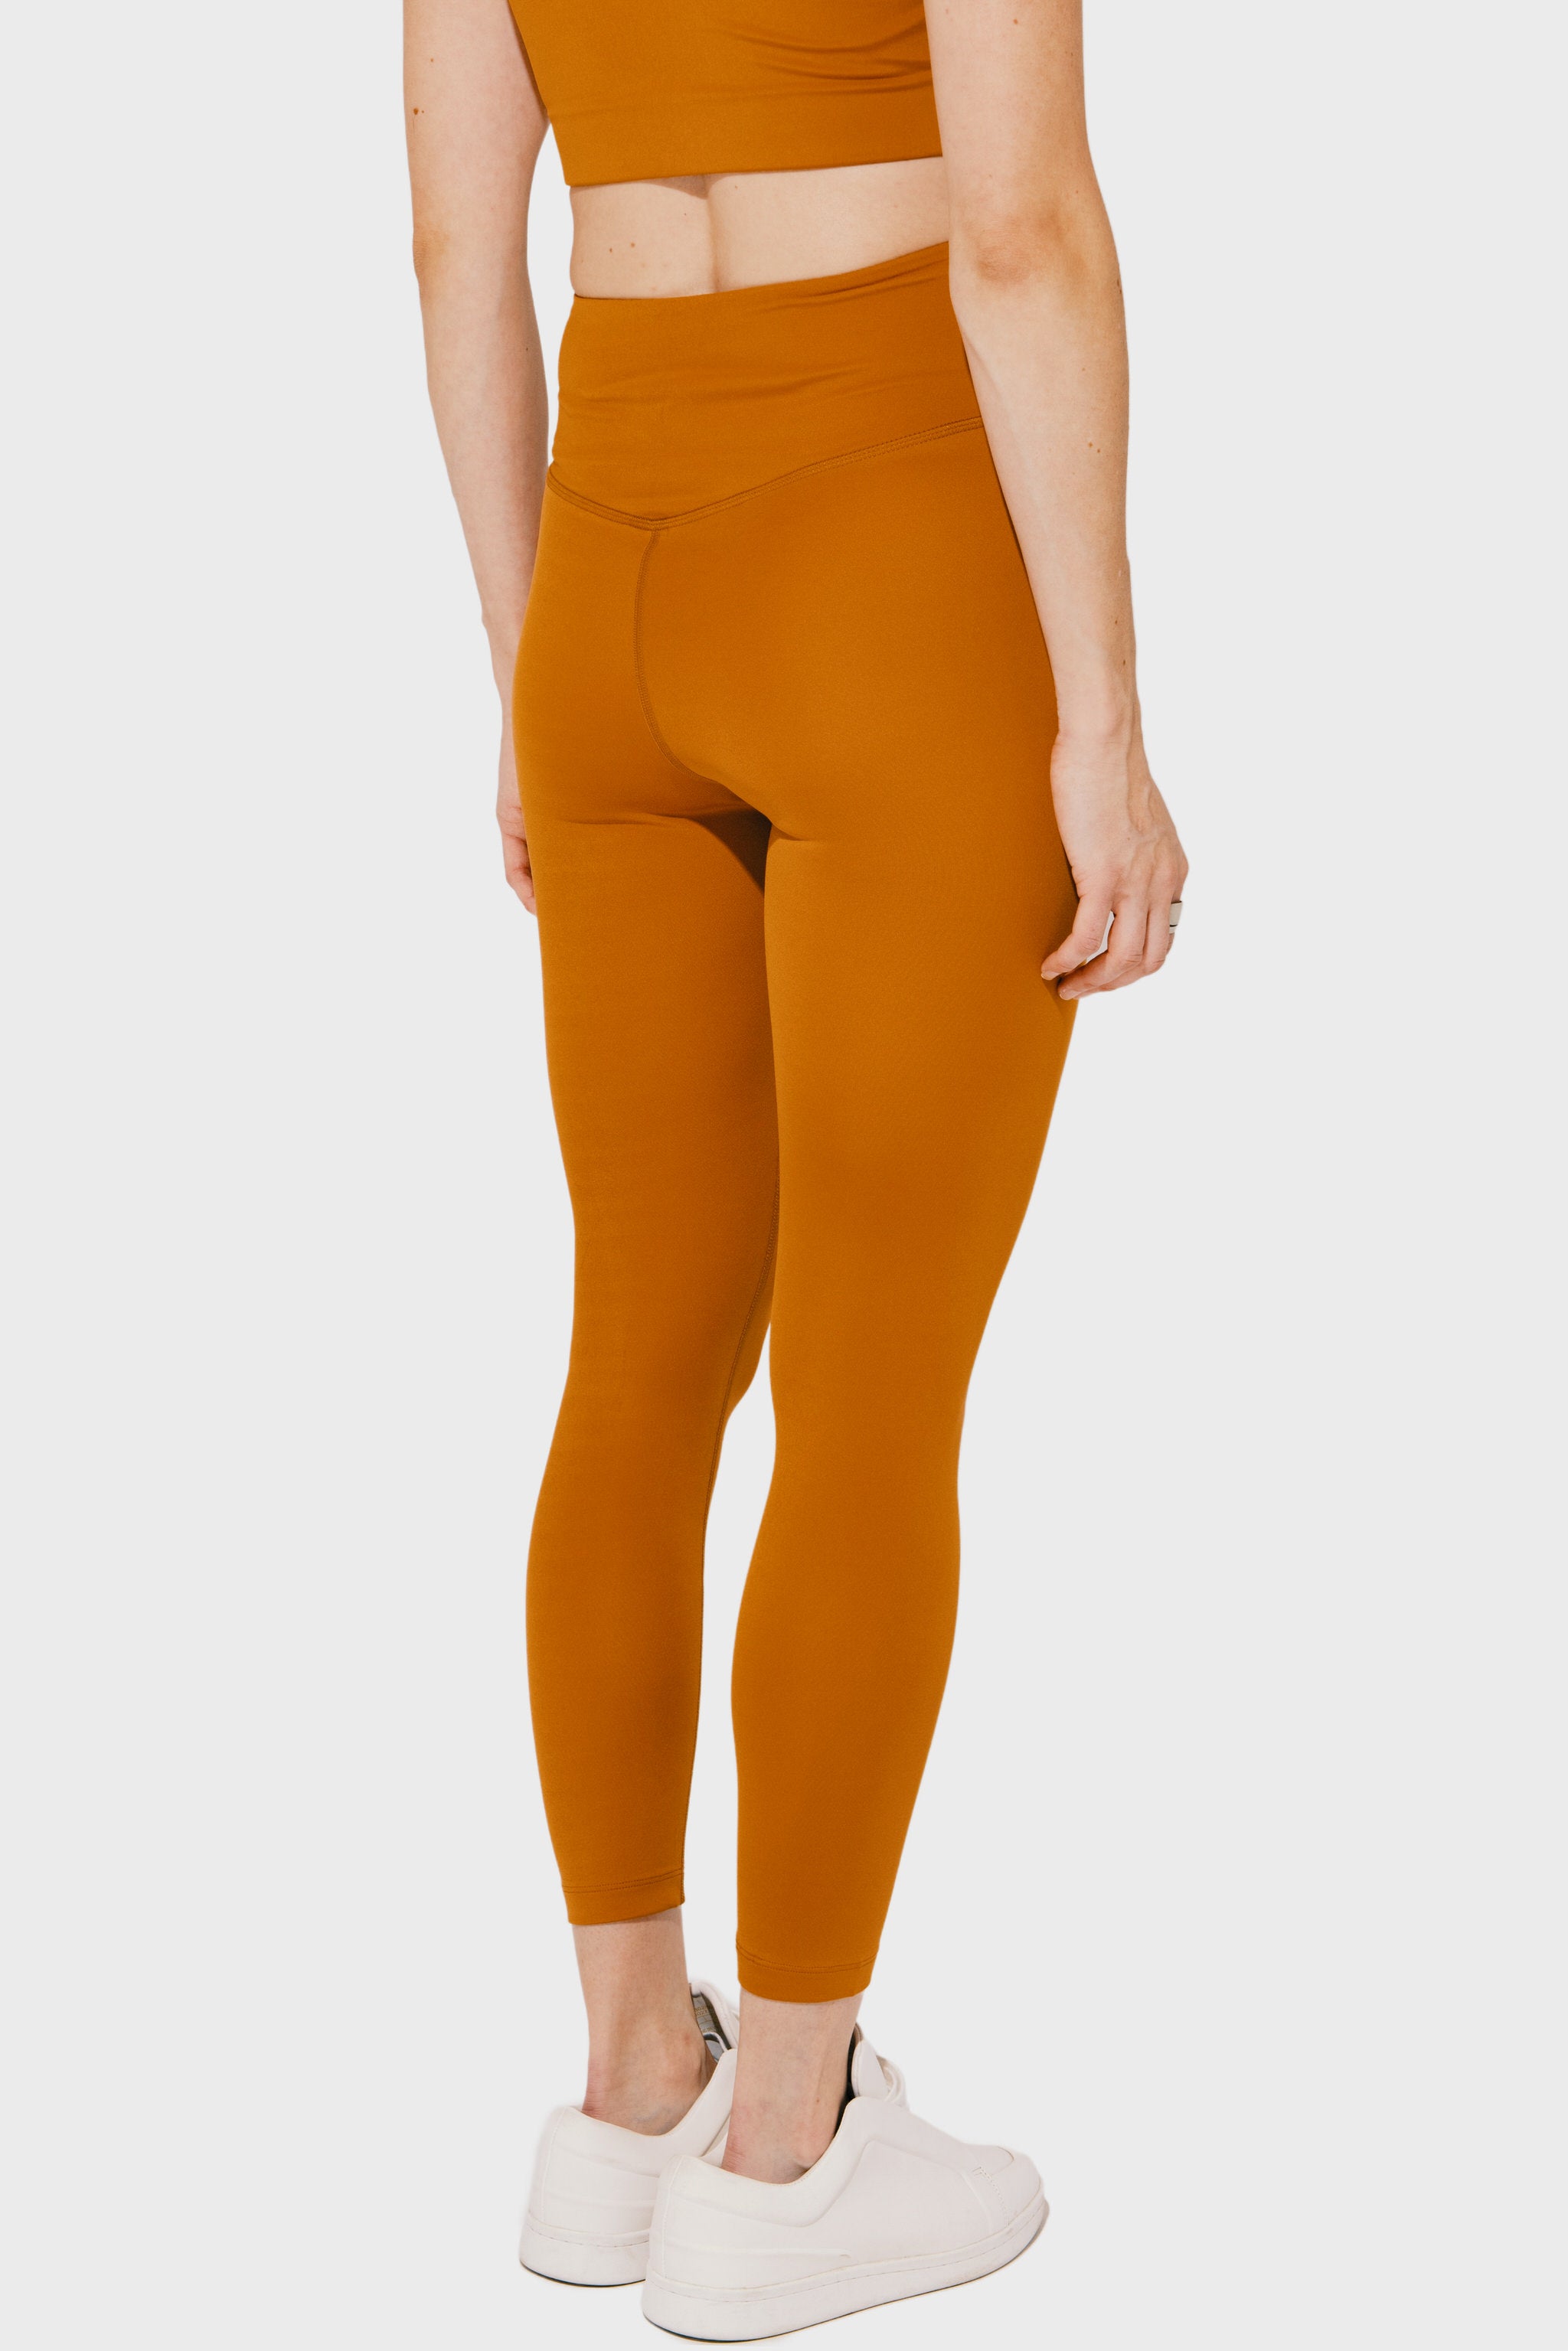 Girlfriend Collective FLOAT Seamless High Rise Legging in Spice